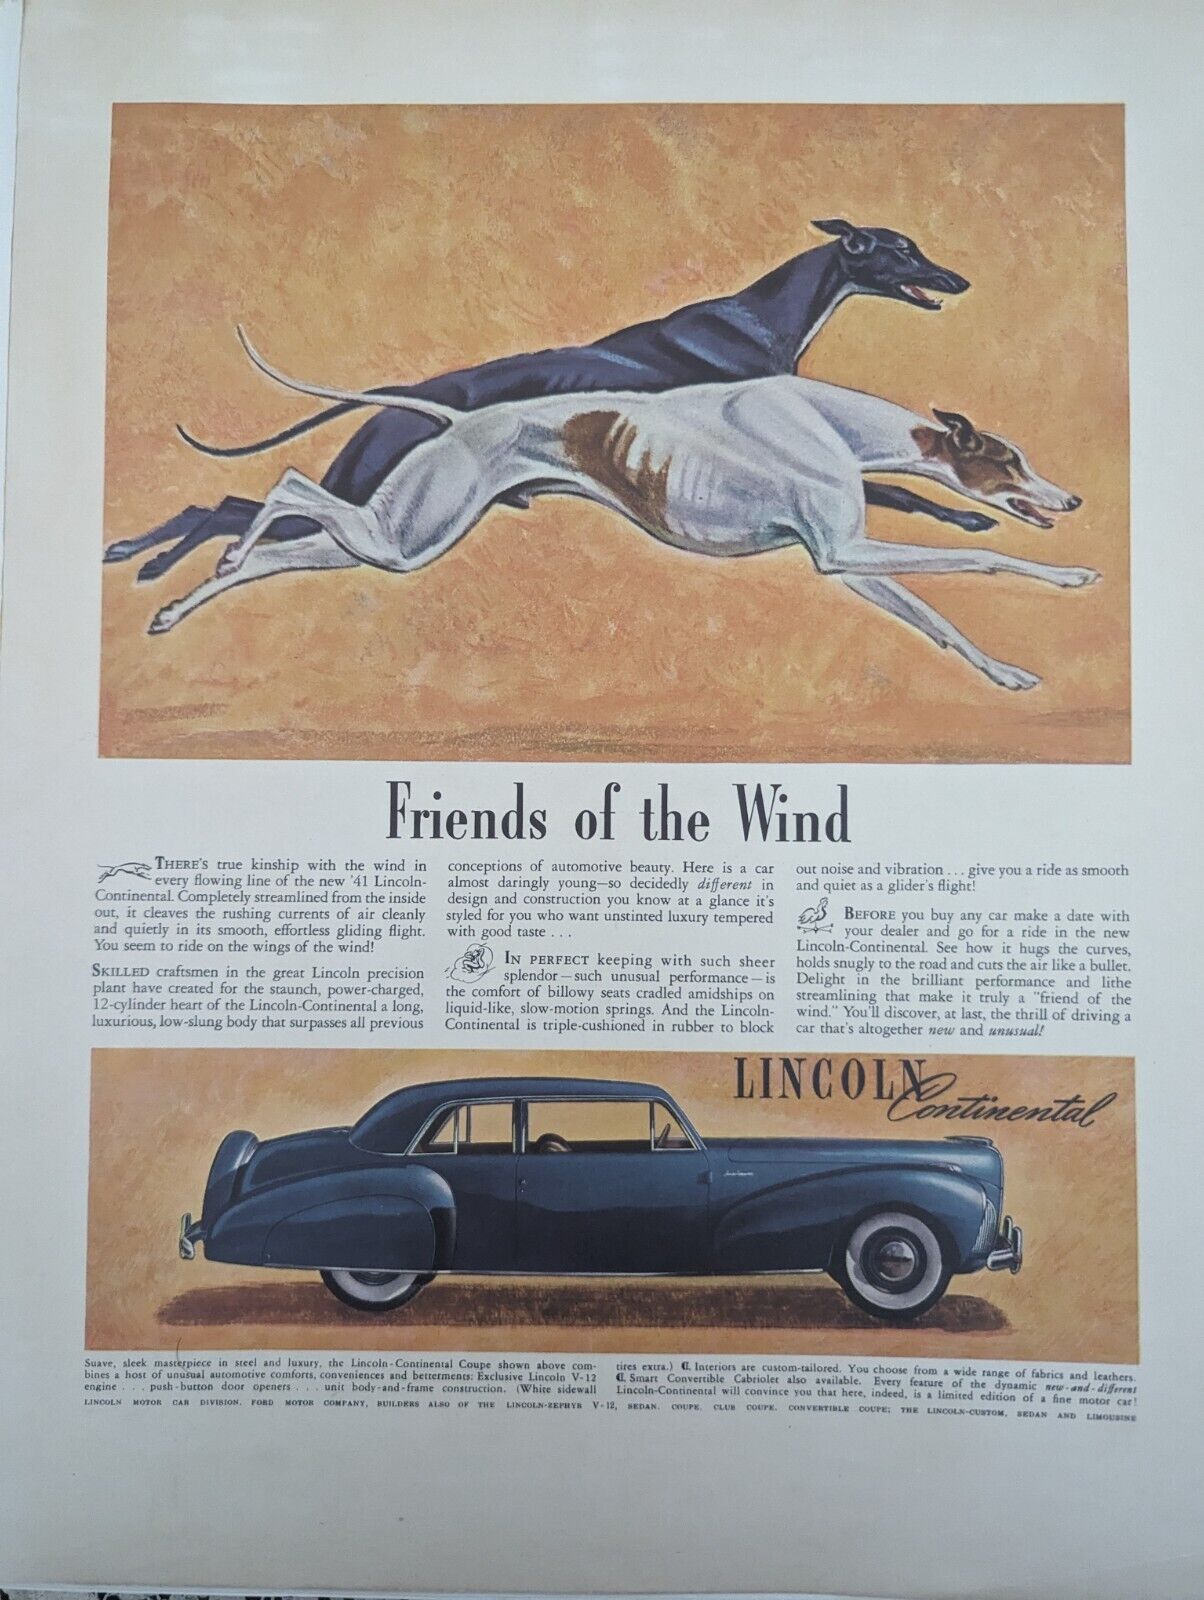 Vintage 1941 Magazine Ad Advertising Lincoln Continental Car Greyhound Dogs